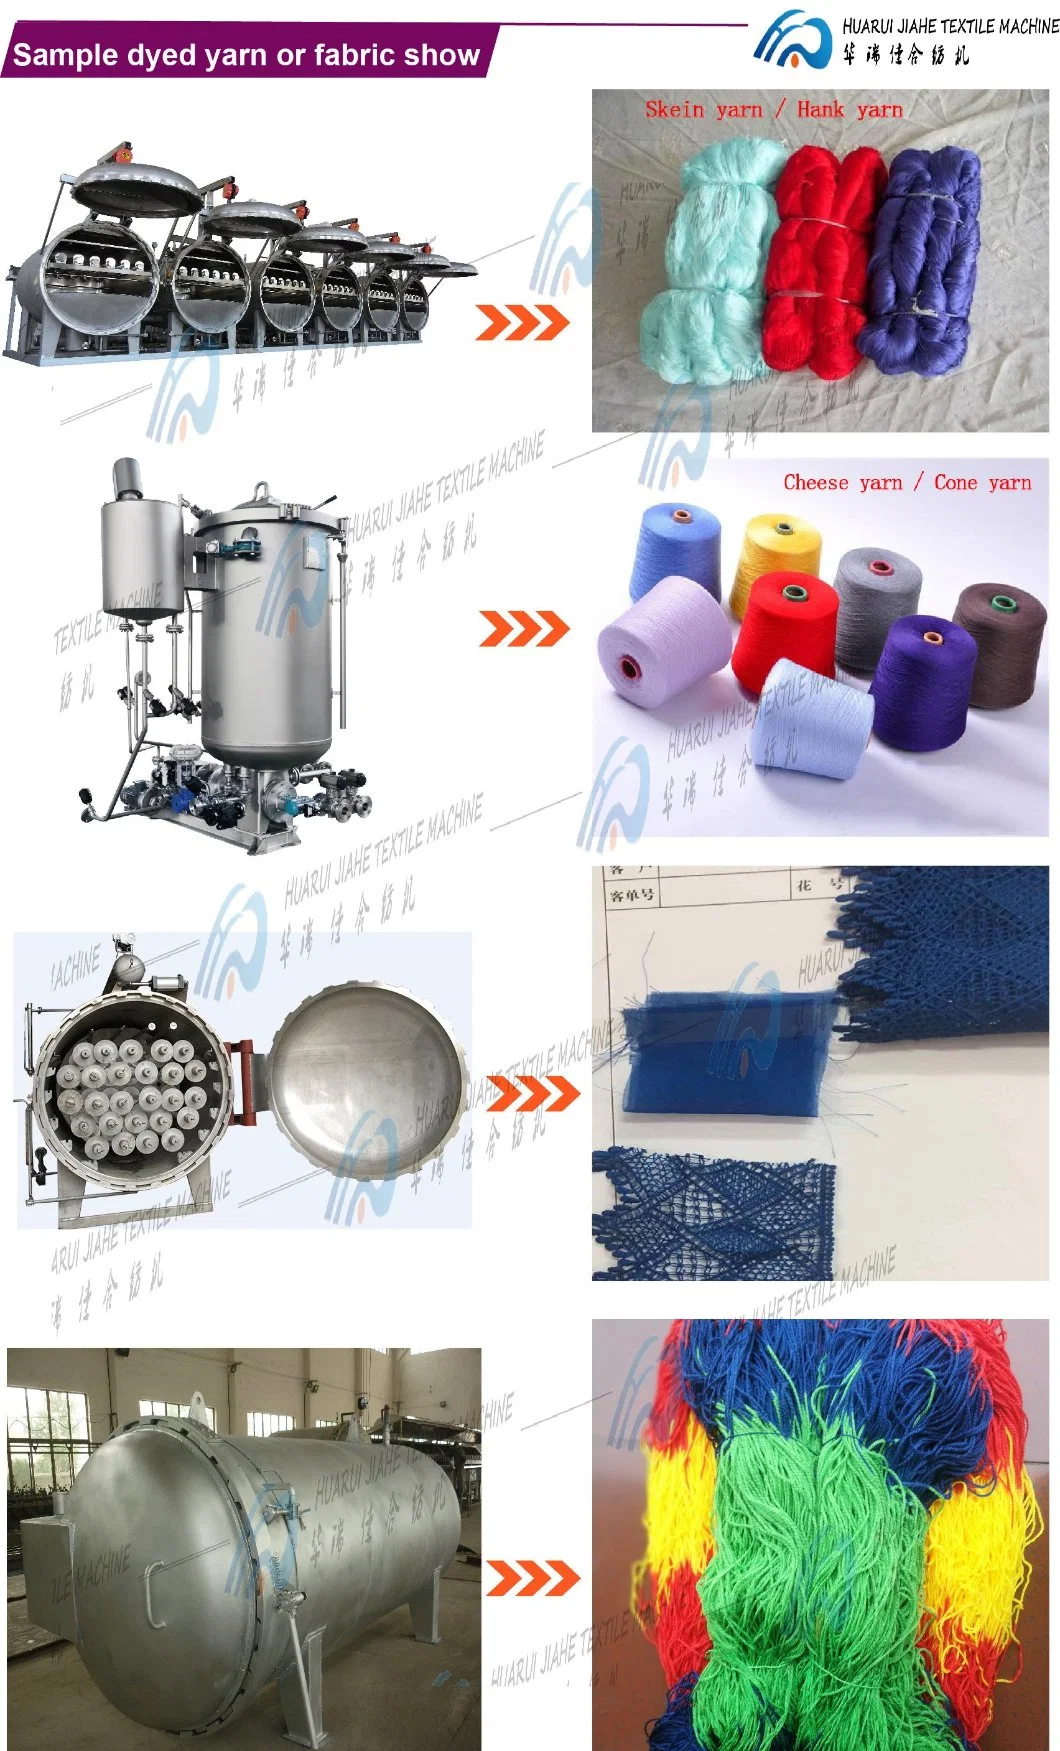 High Quality Machine Grade Bleach Protectant for Cotton Fabric Dyeing Drying Machine Squeezing Moisture in Cone/Cheese for All Kinds of Textile Spun Yarn